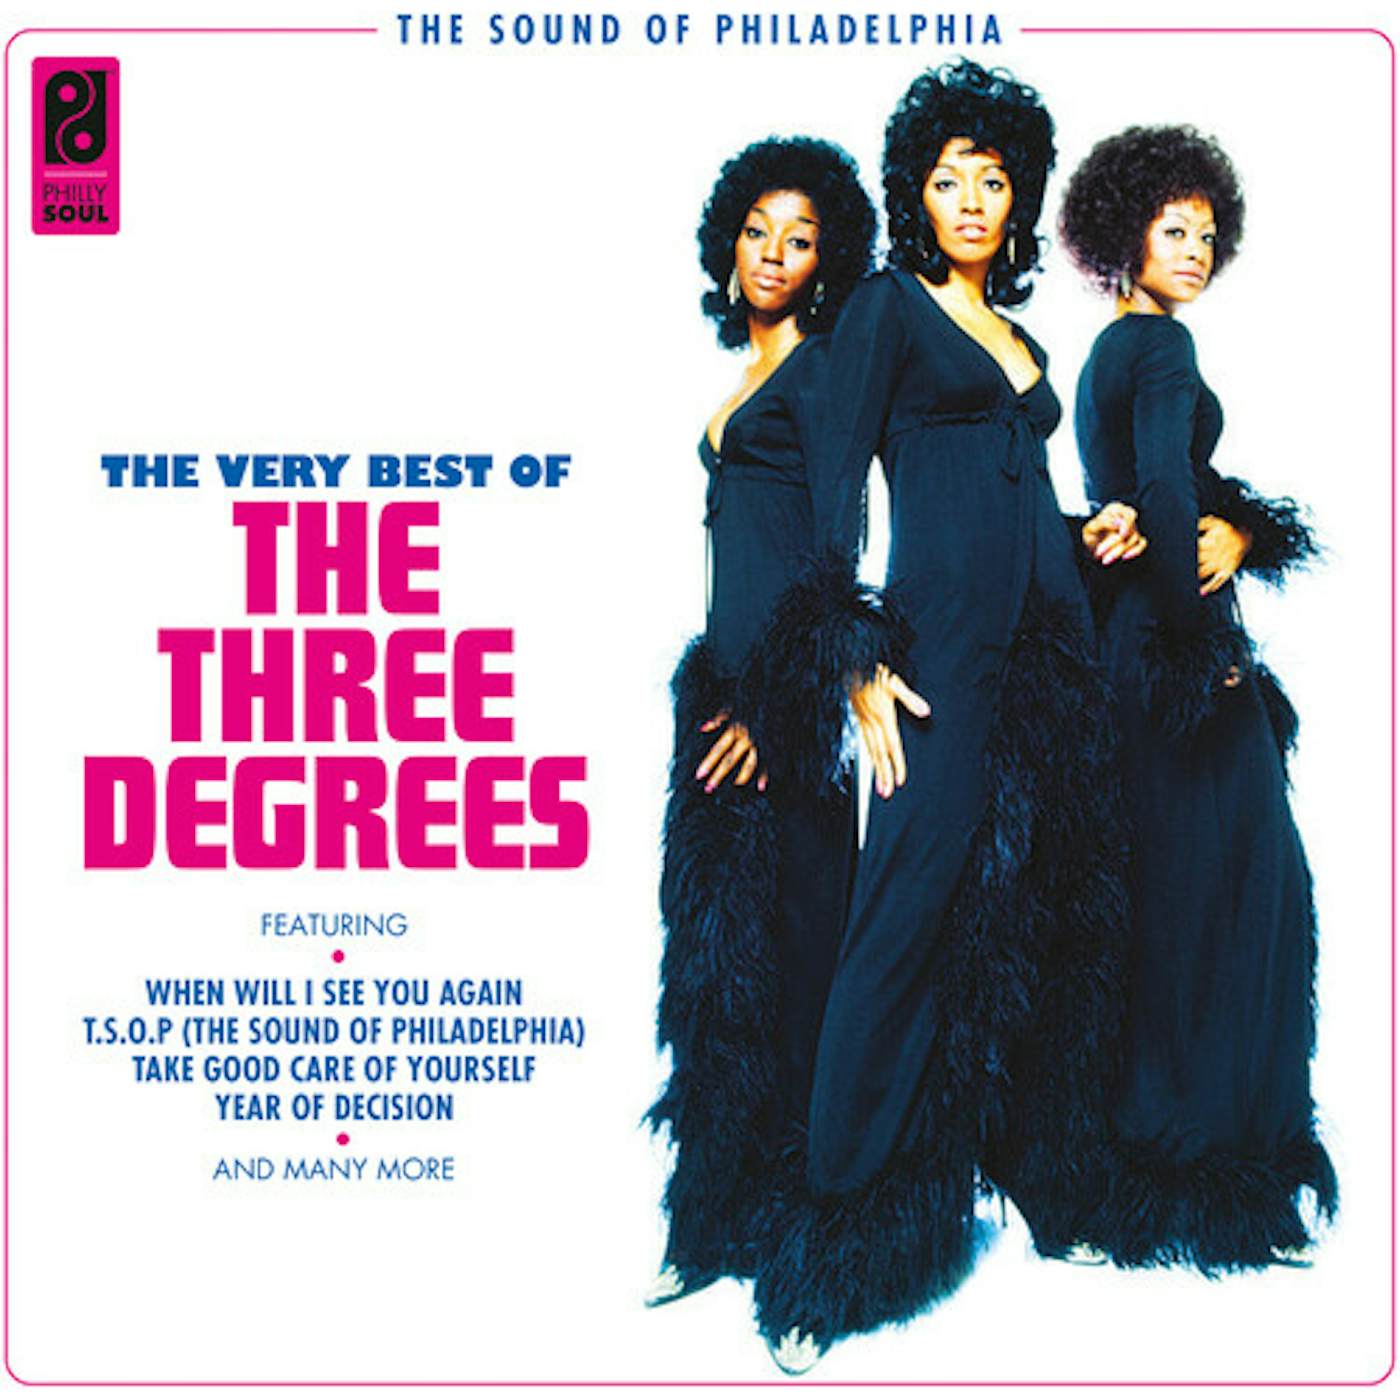 The Three Degrees: THE VERY BEST CD